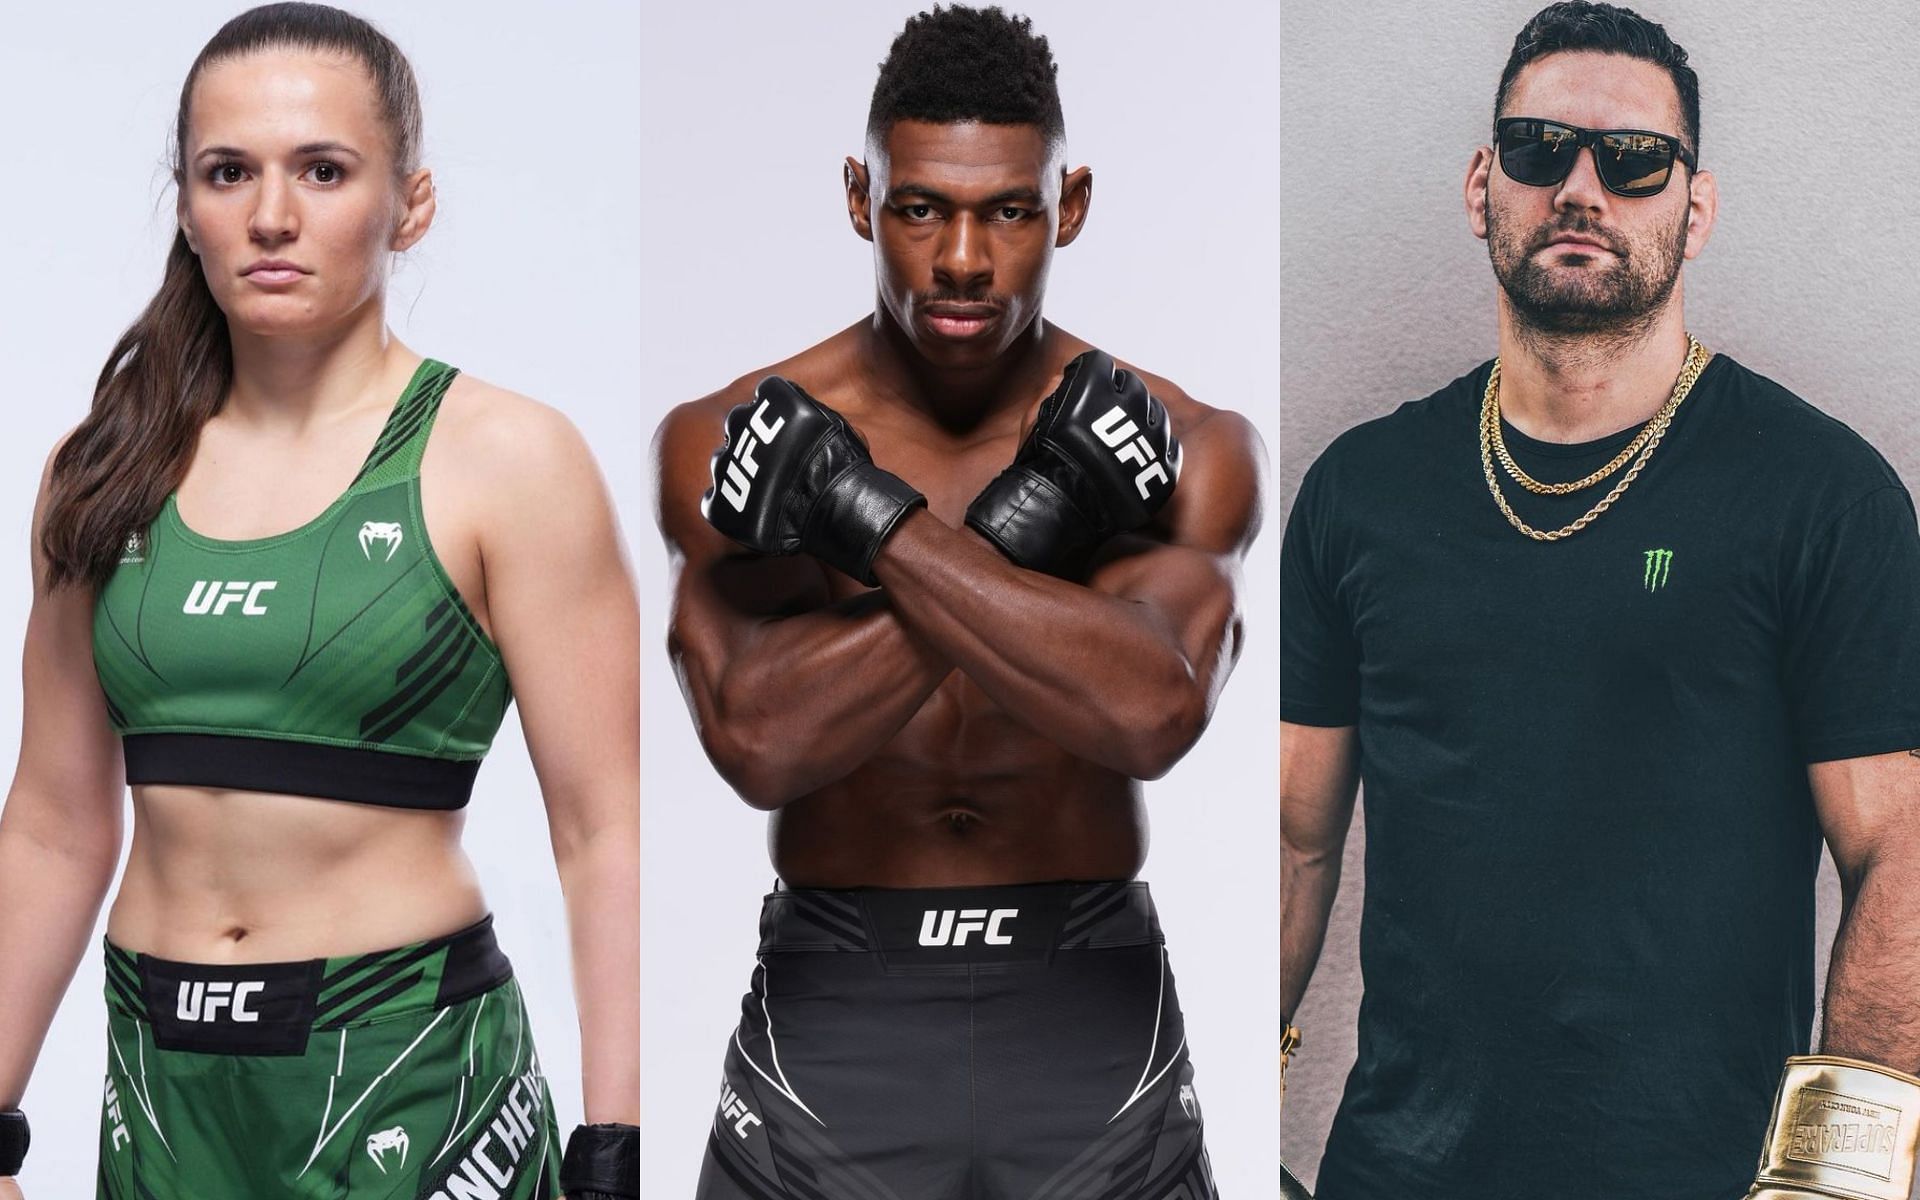 UFC Atlantic City: Which songs have Erin Blanchfield, Joaquin Buckley, Chris Weidman, and others walked out to before?